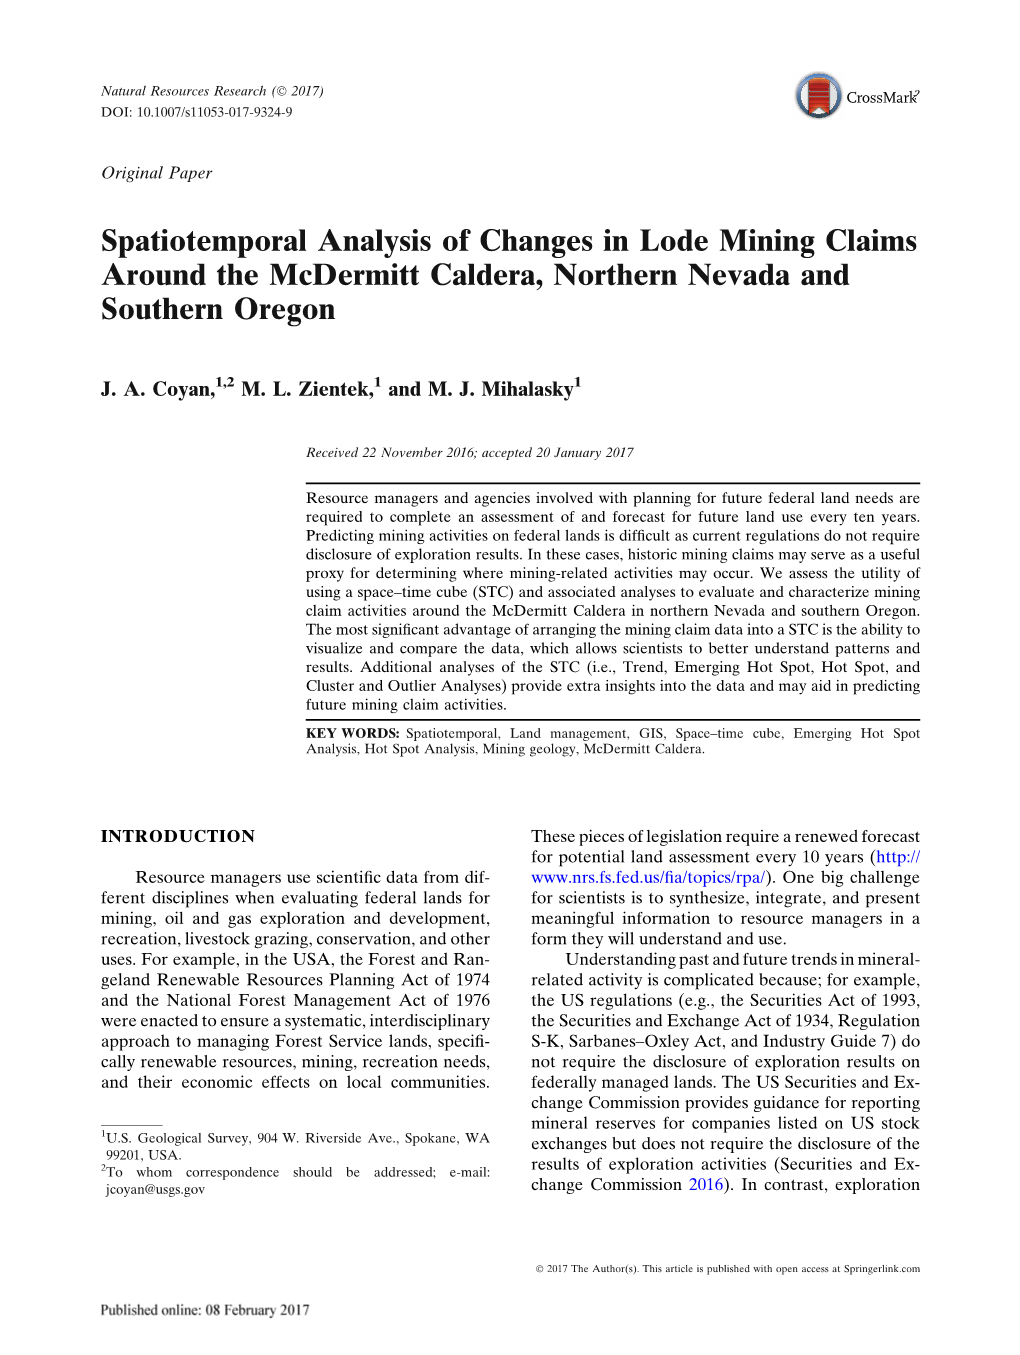 Spatiotemporal Analysis of Changes in Lode Mining Claims Around the Mcdermitt Caldera, Northern Nevada and Southern Oregon